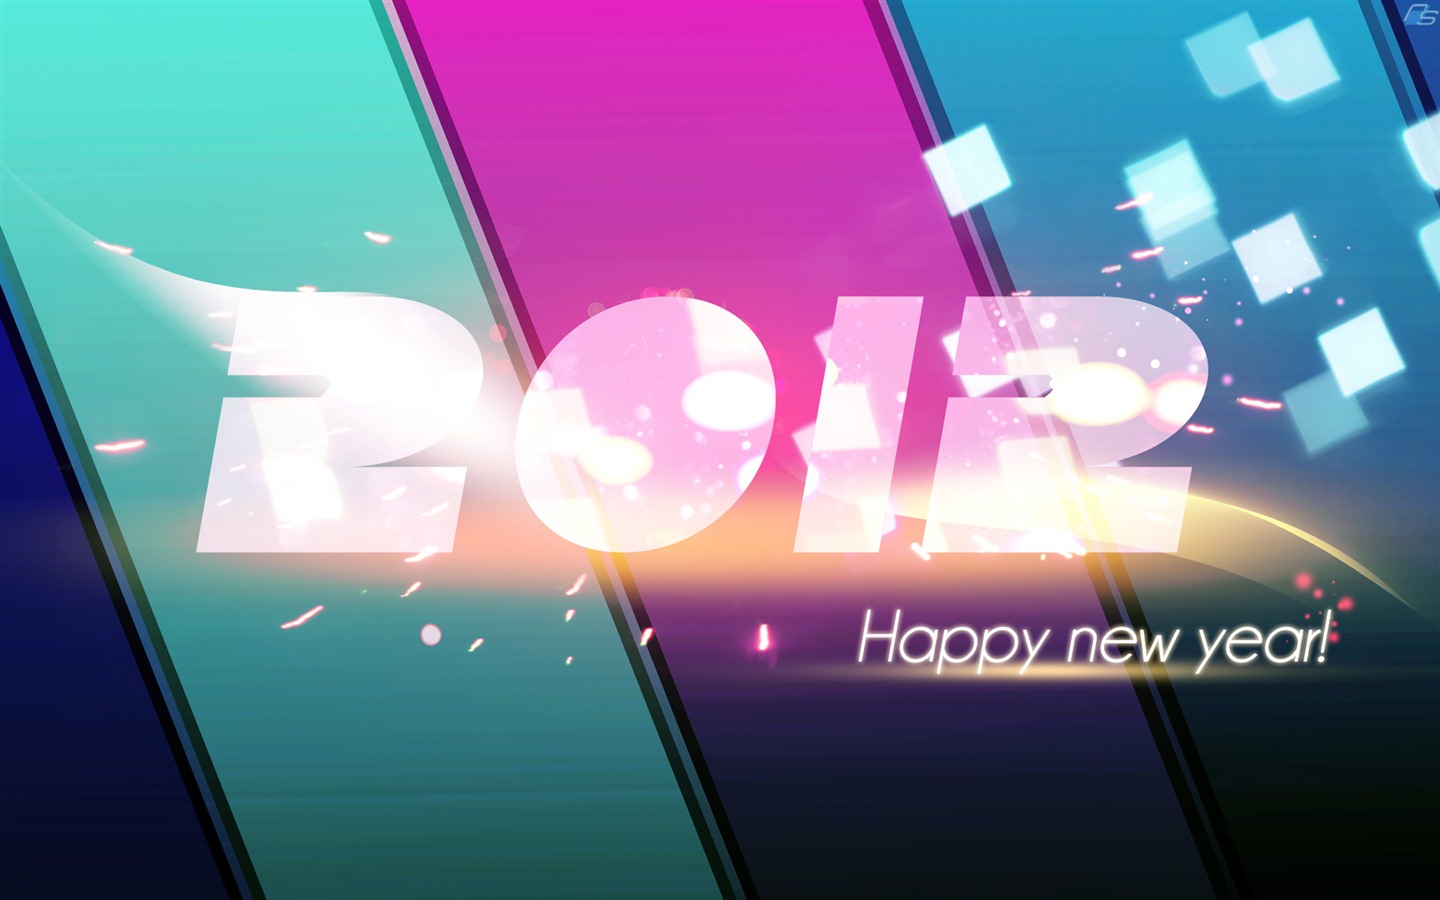 2012 New Year wallpapers (1) #14 - 1440x900